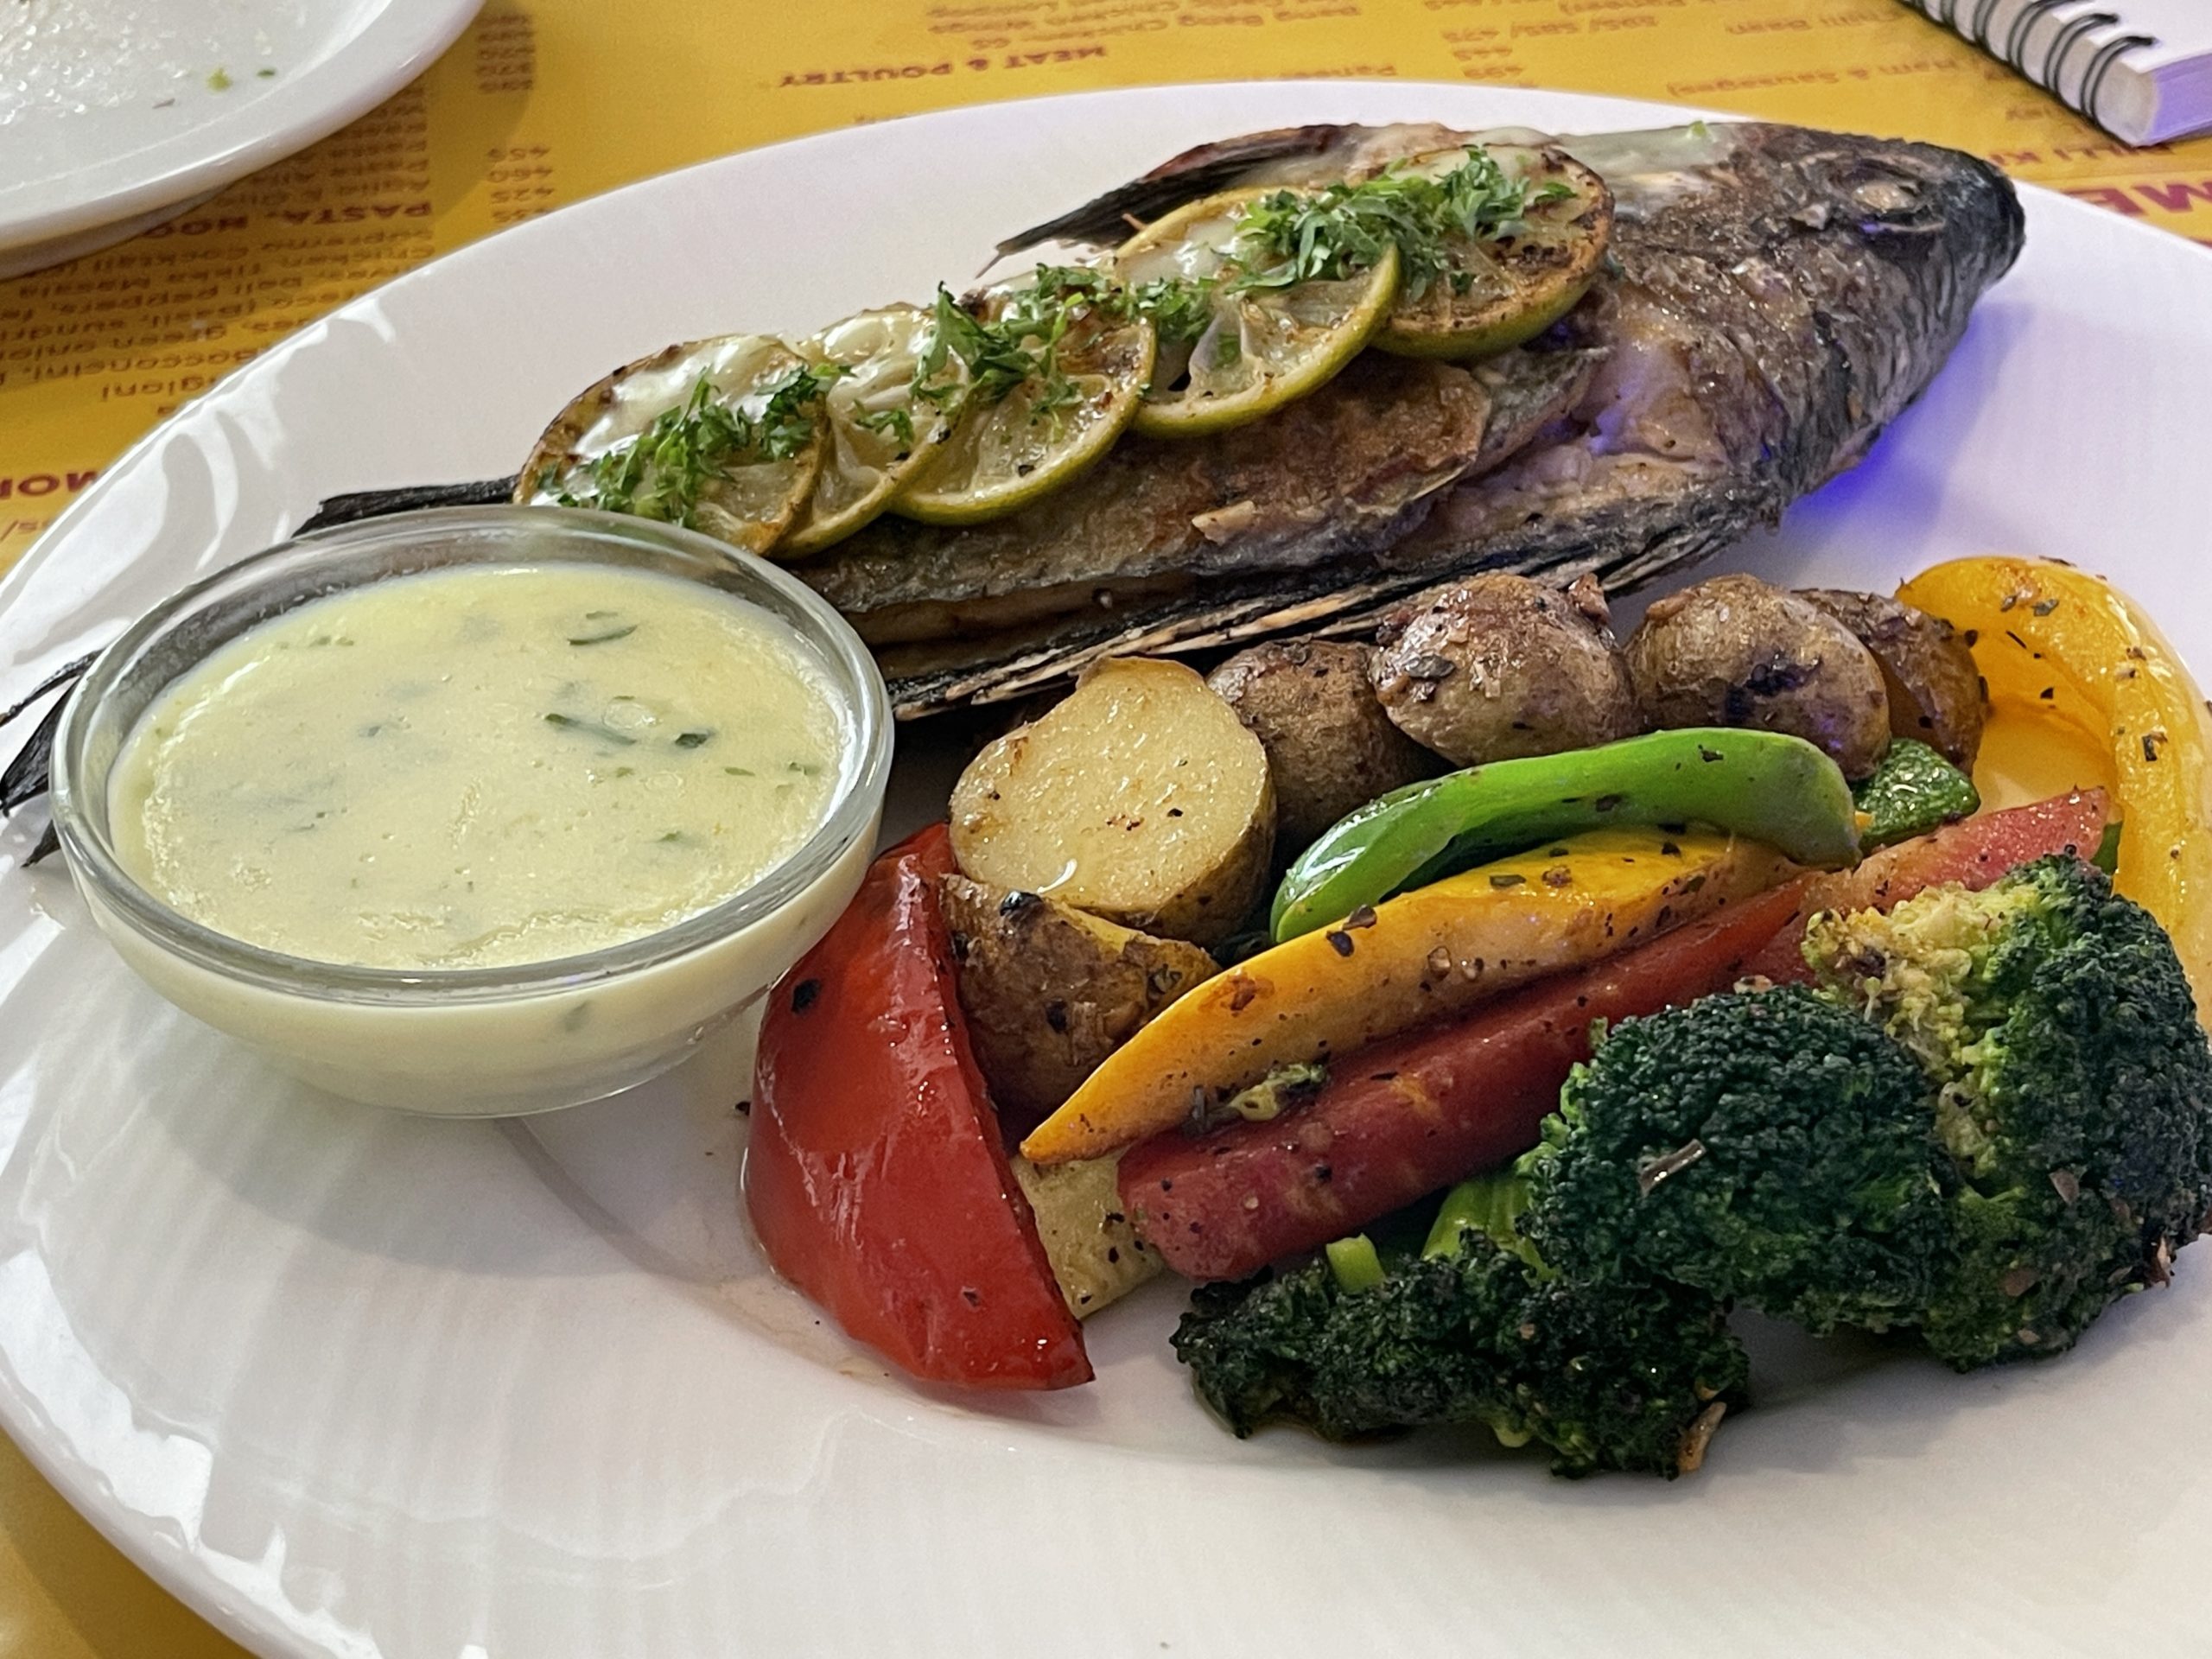 Craving fish? Then Café Delhi Heights has a big catch for you!